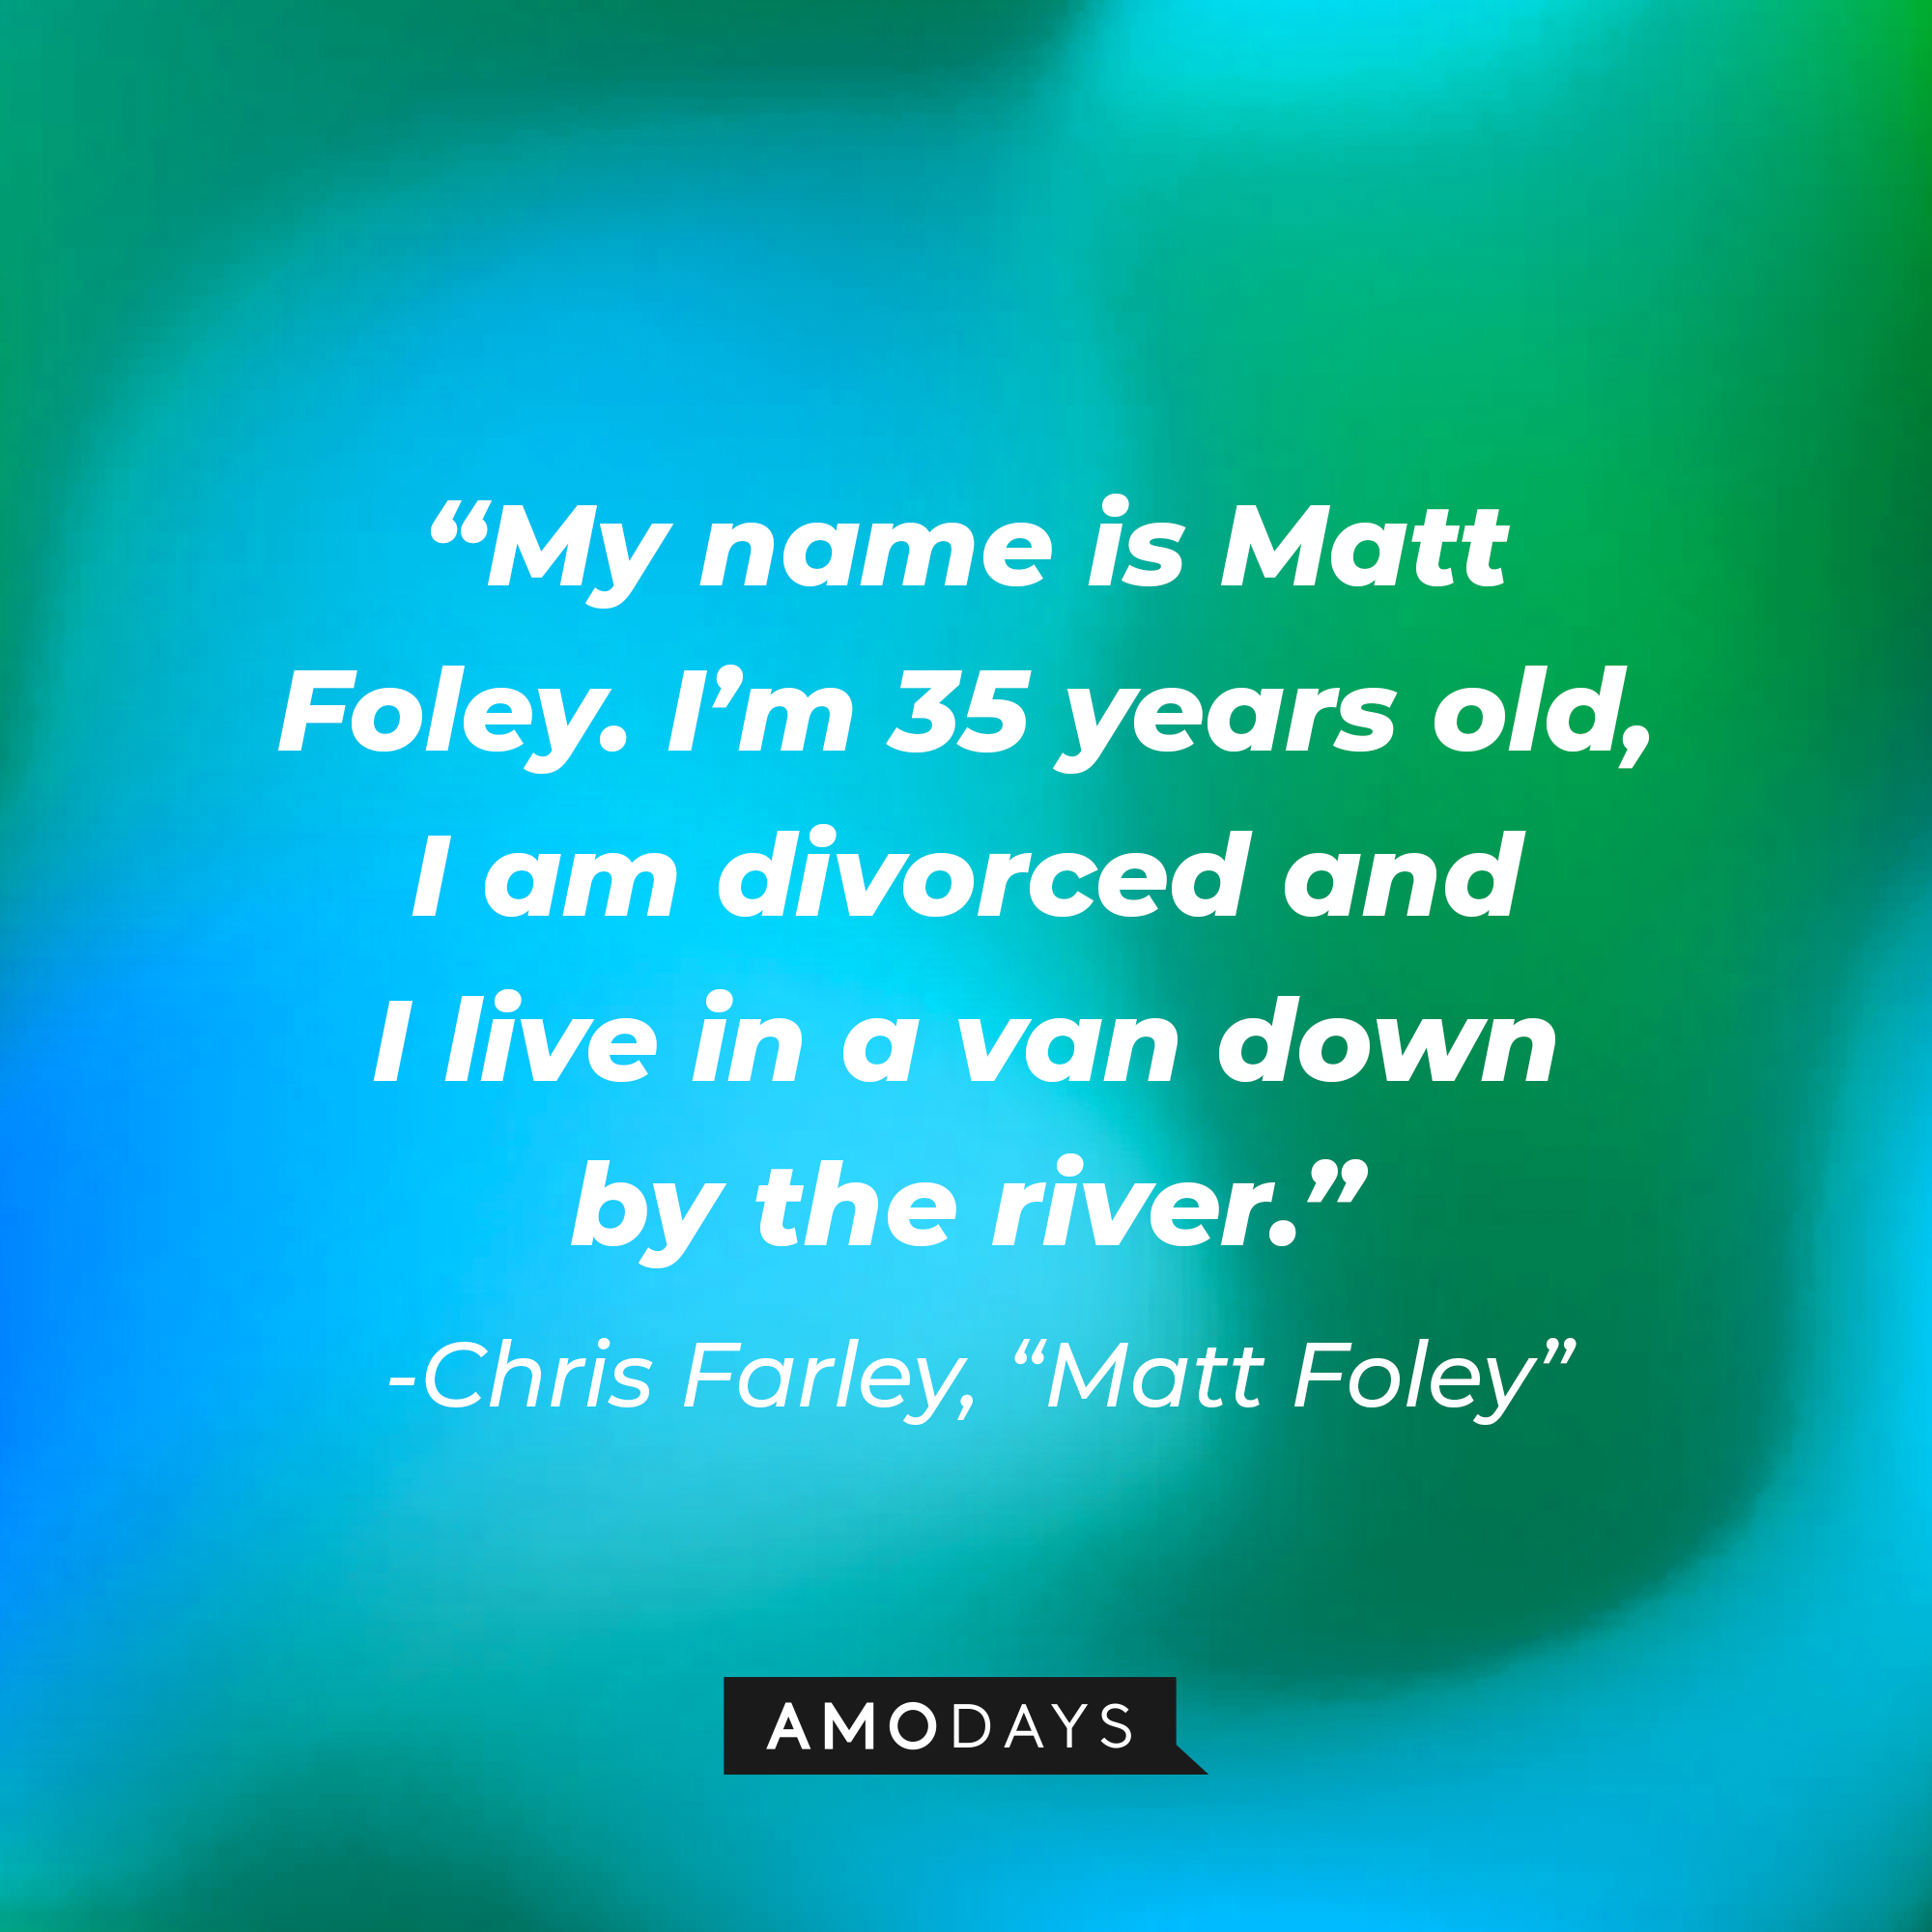 Chris Farley's "Matt Foley" quote: “My name is Matt Foley. I’m 35 years old, I am divorced and I live in a van down by the river.” | Source: Amodays